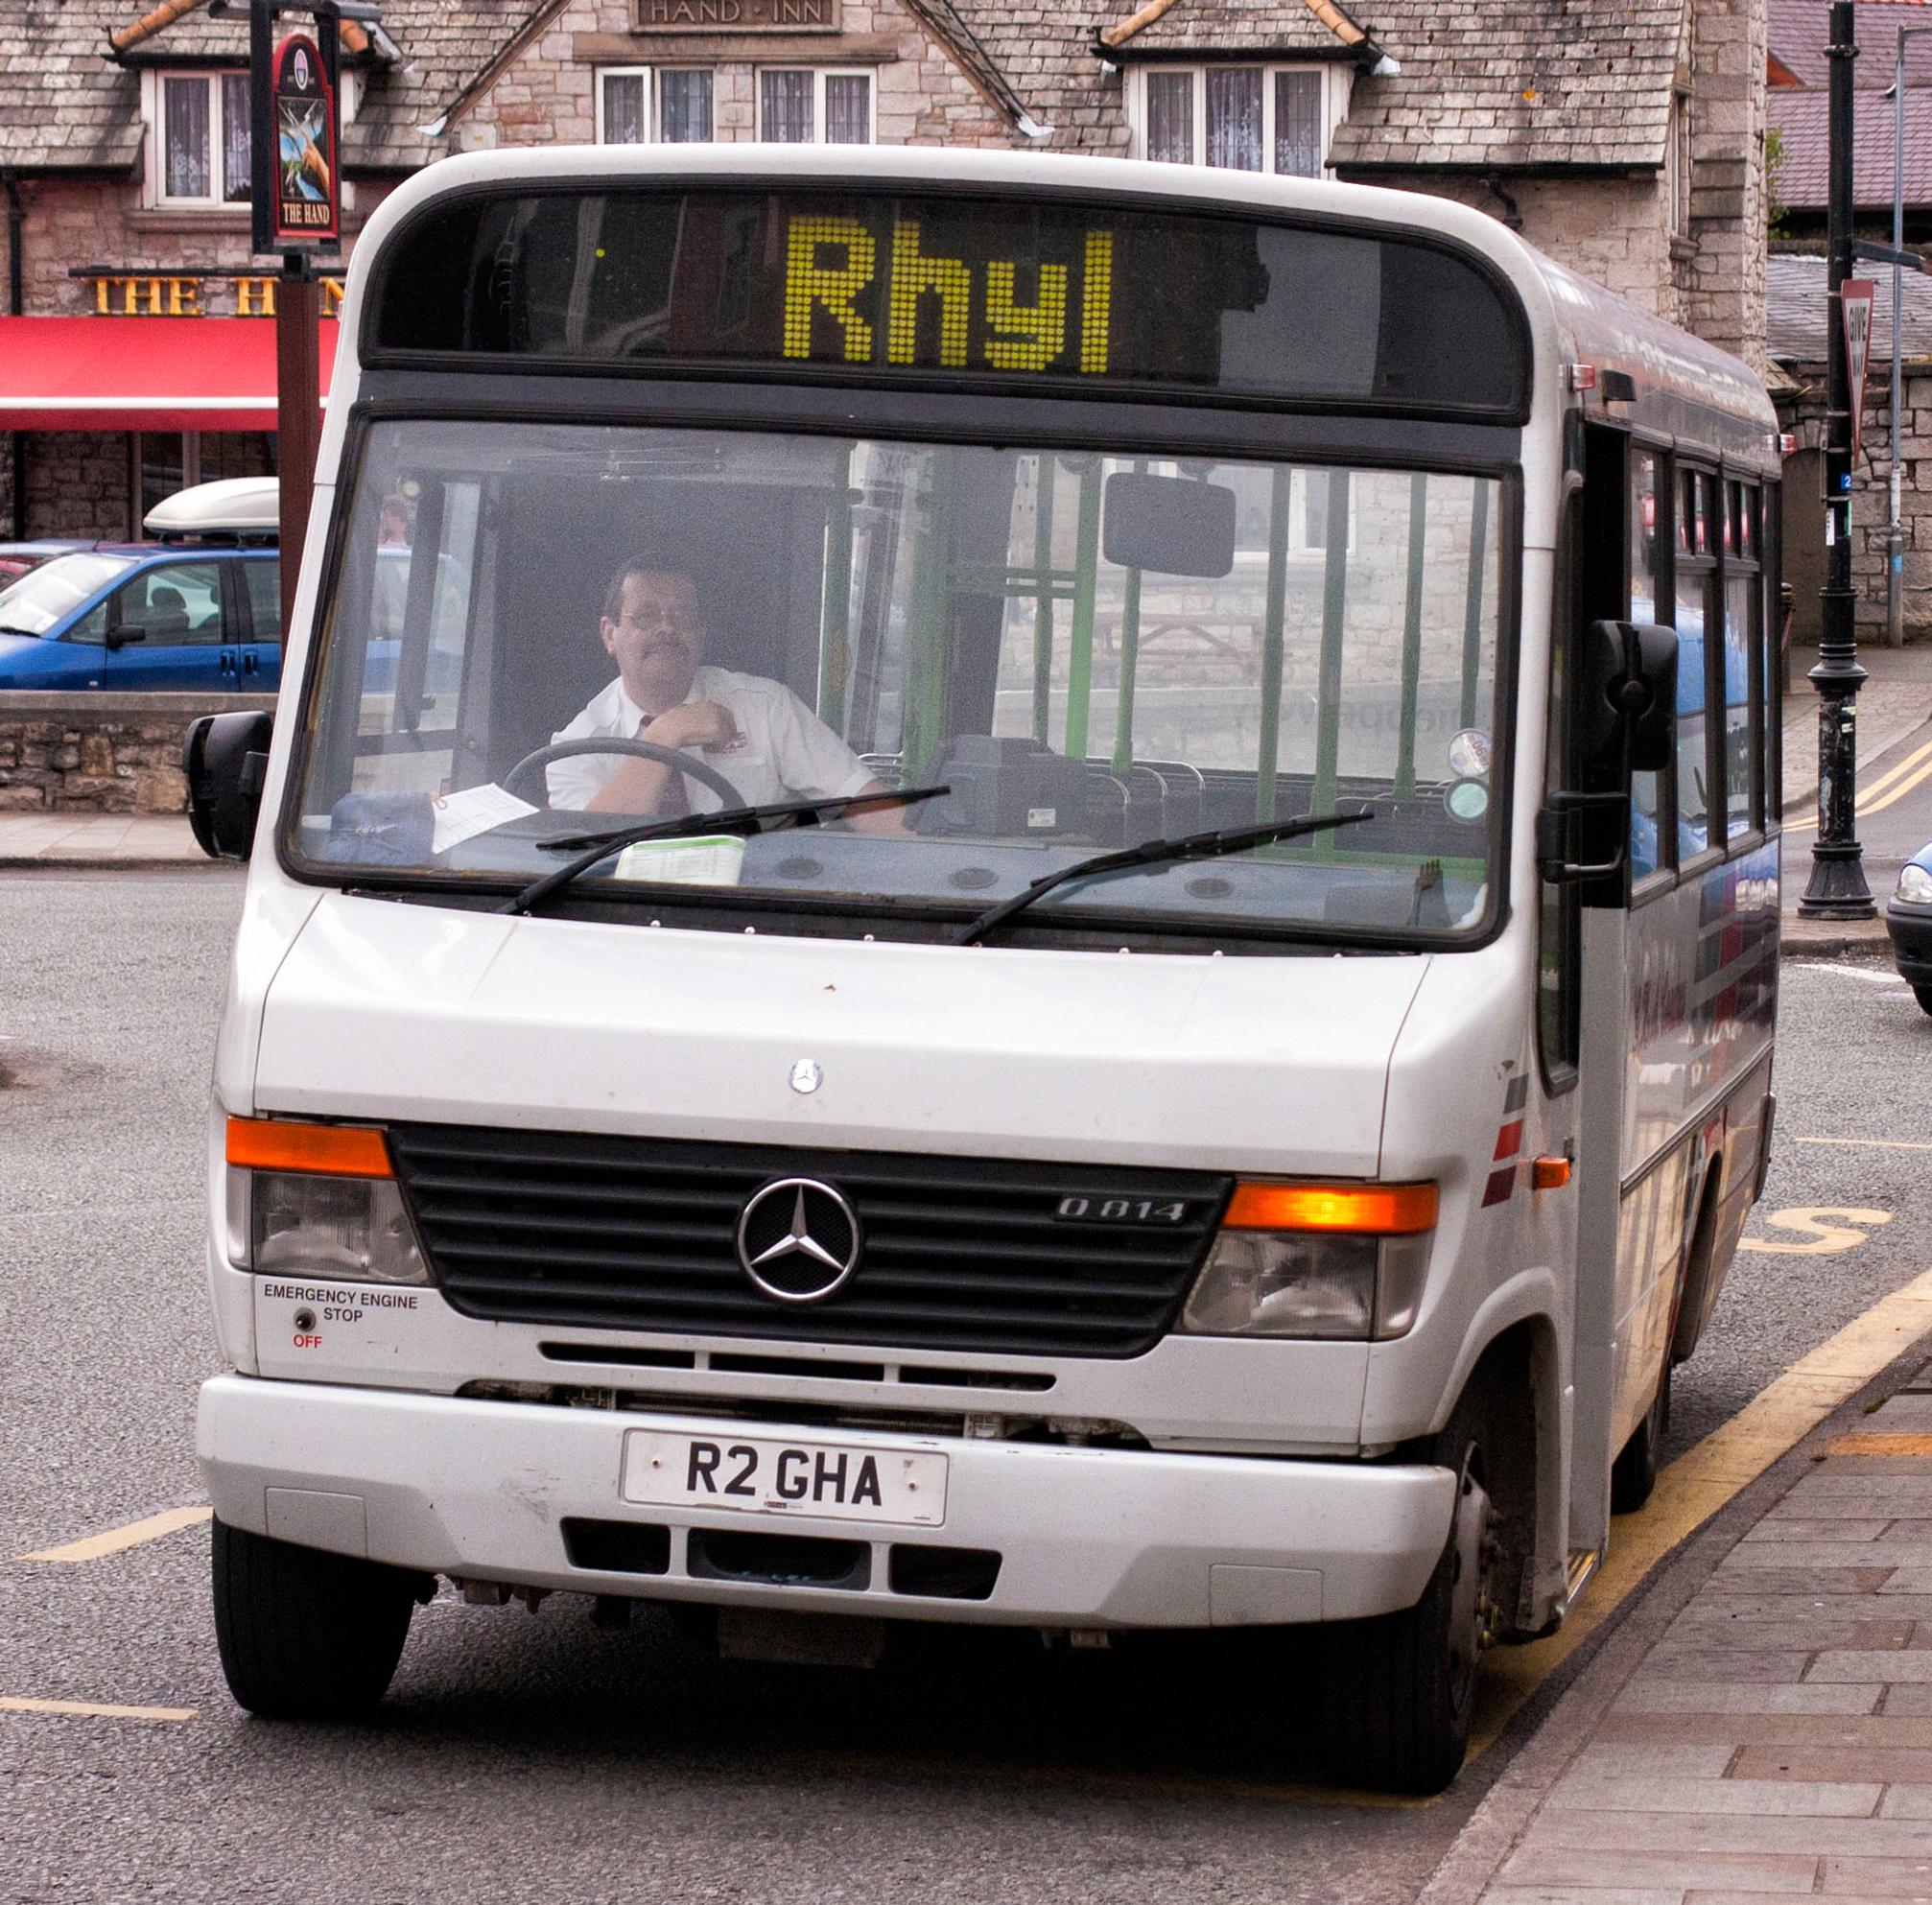 DVSA has taken no action over continued use of step-entrance buses like this one photographed in 2007 before the legislation